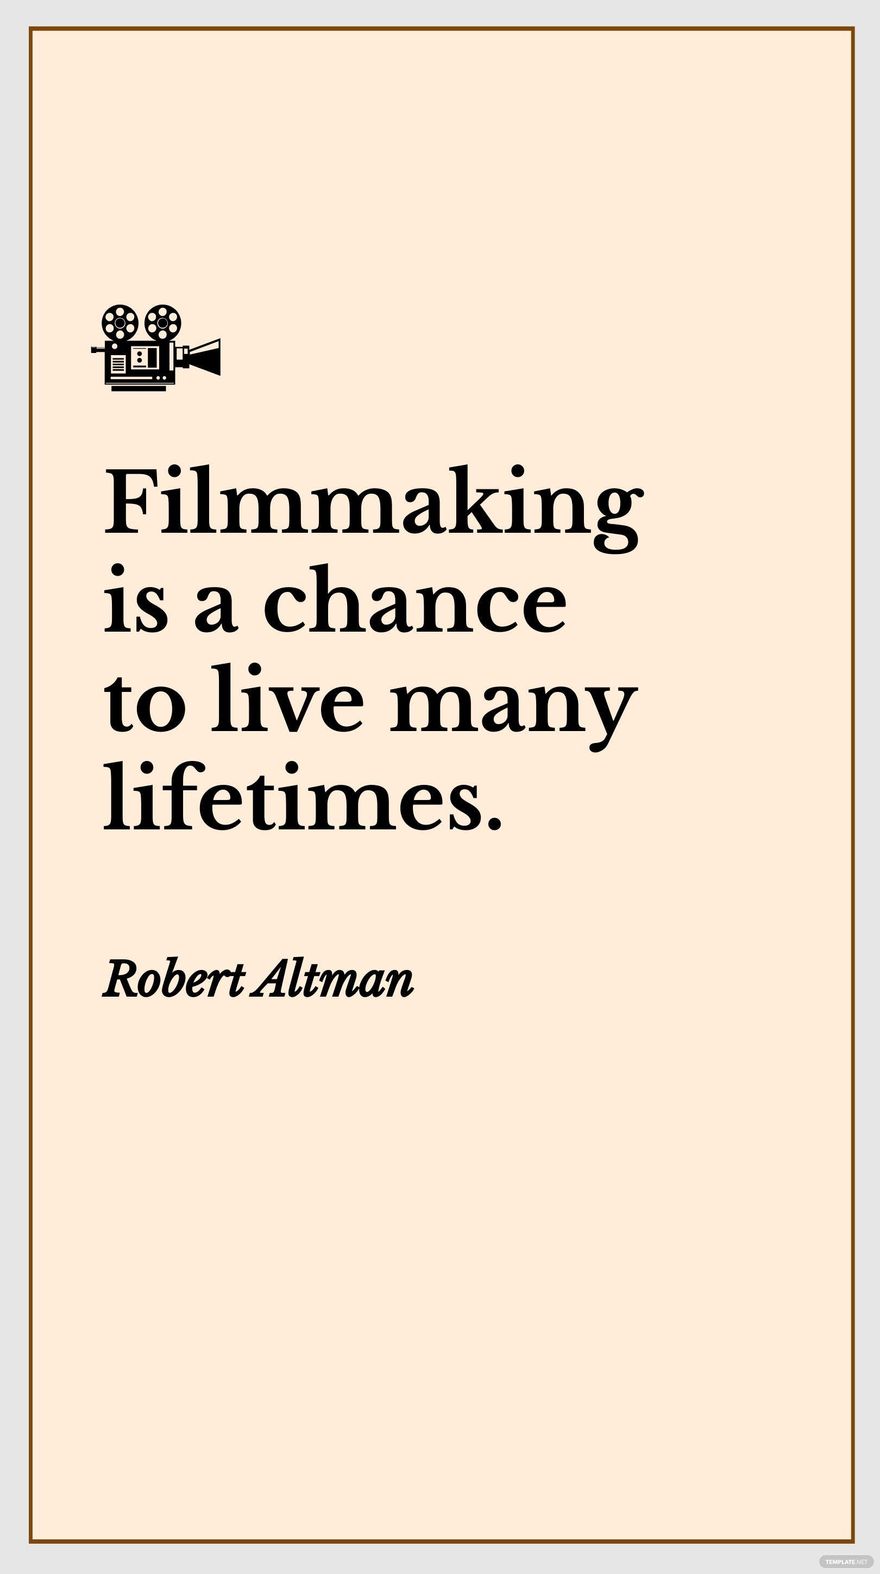 Robert Altman - Filmmaking is a chance to live many lifetimes. in JPG